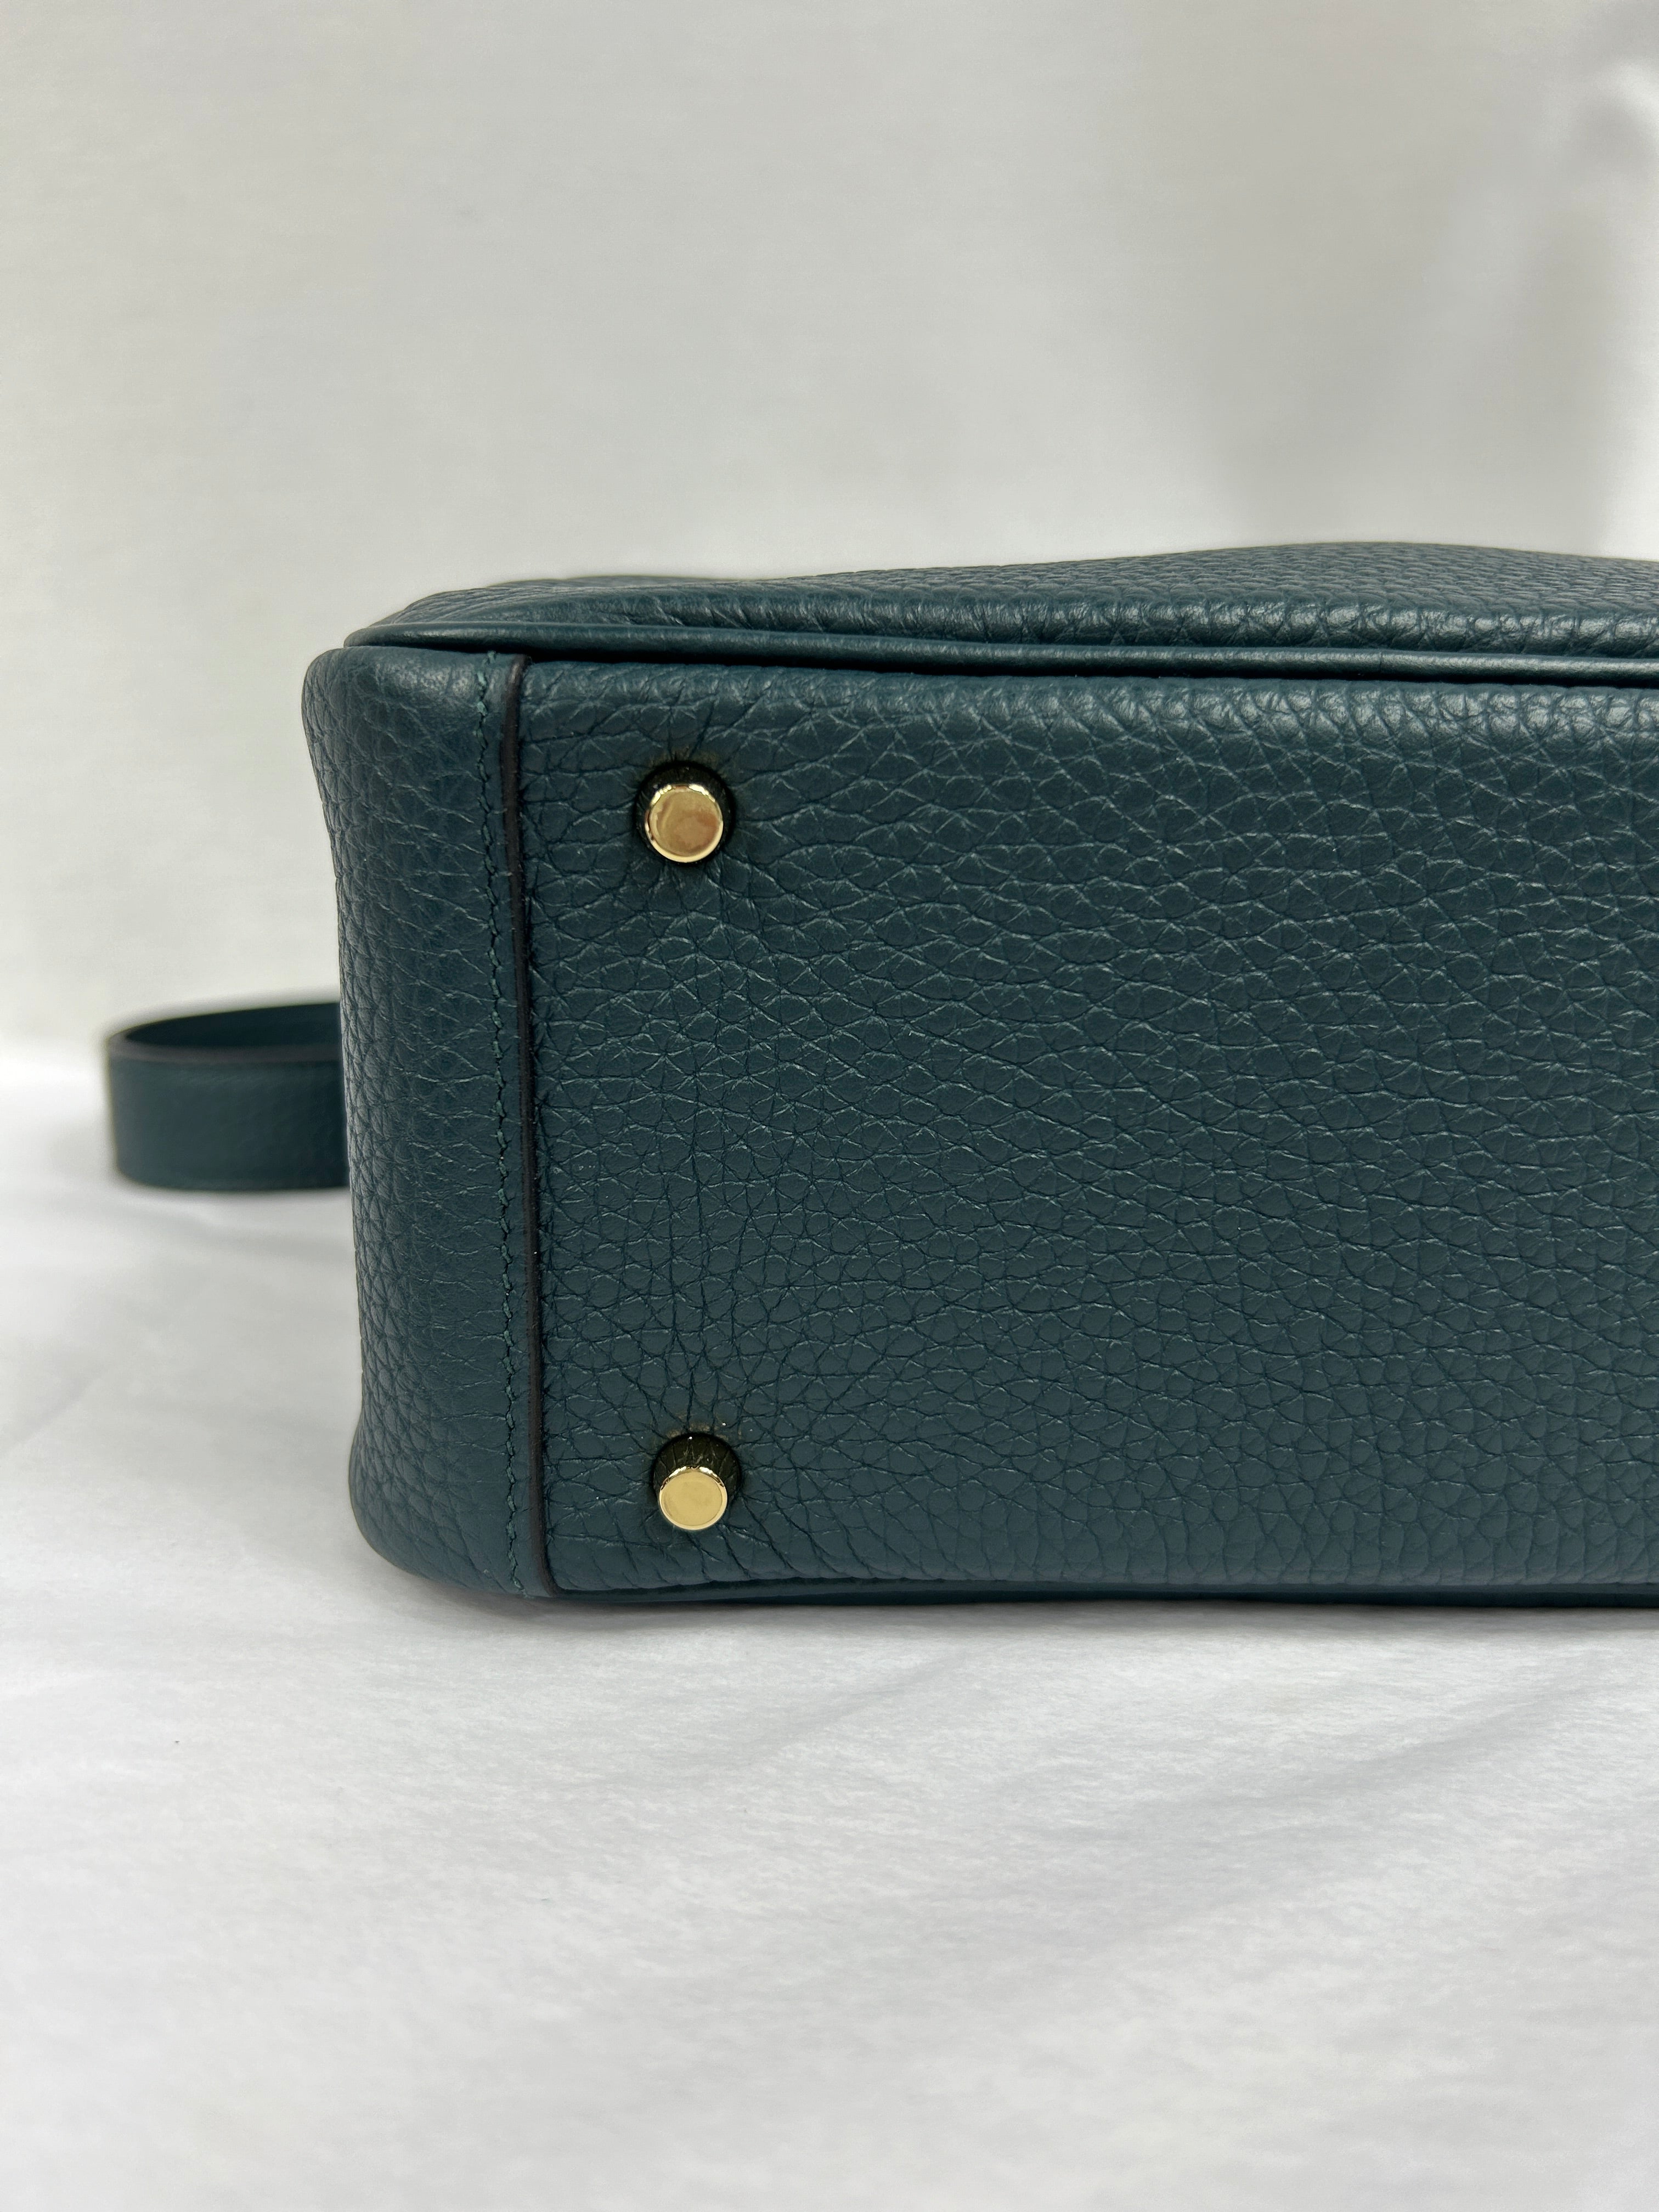 Vert Cypress Clemence leather Mini Lindy w/GHW